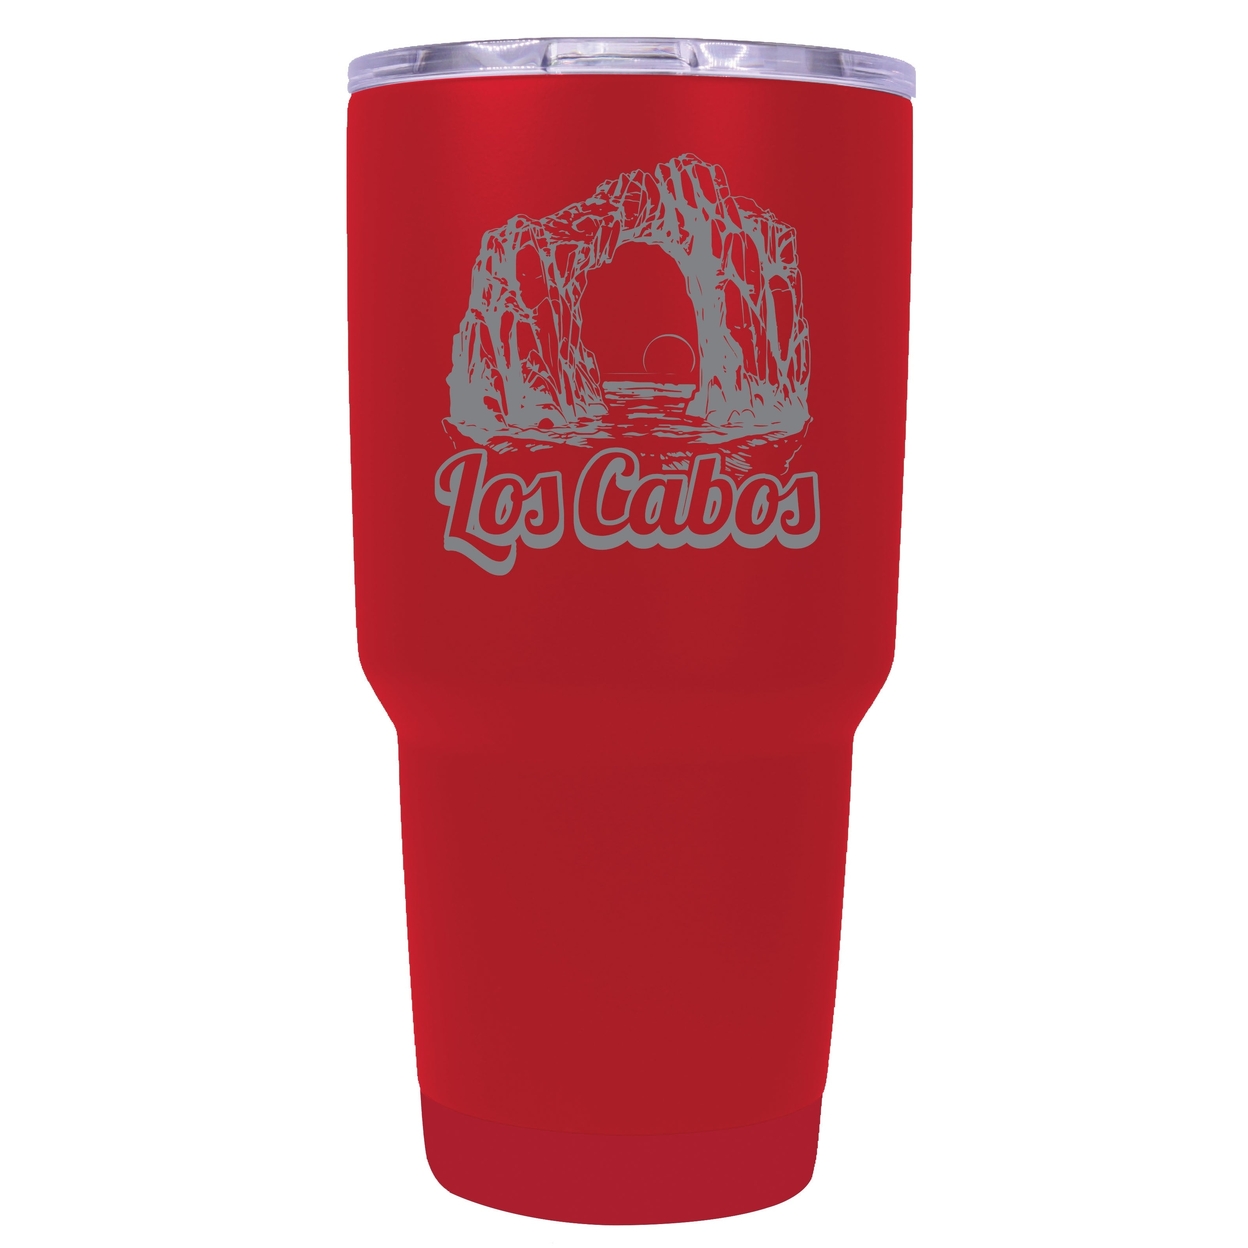 Los Cabos Mexico Souvenir 24 Oz Engraved Insulated Stainless Steel Tumbler - Green,,4-Pack